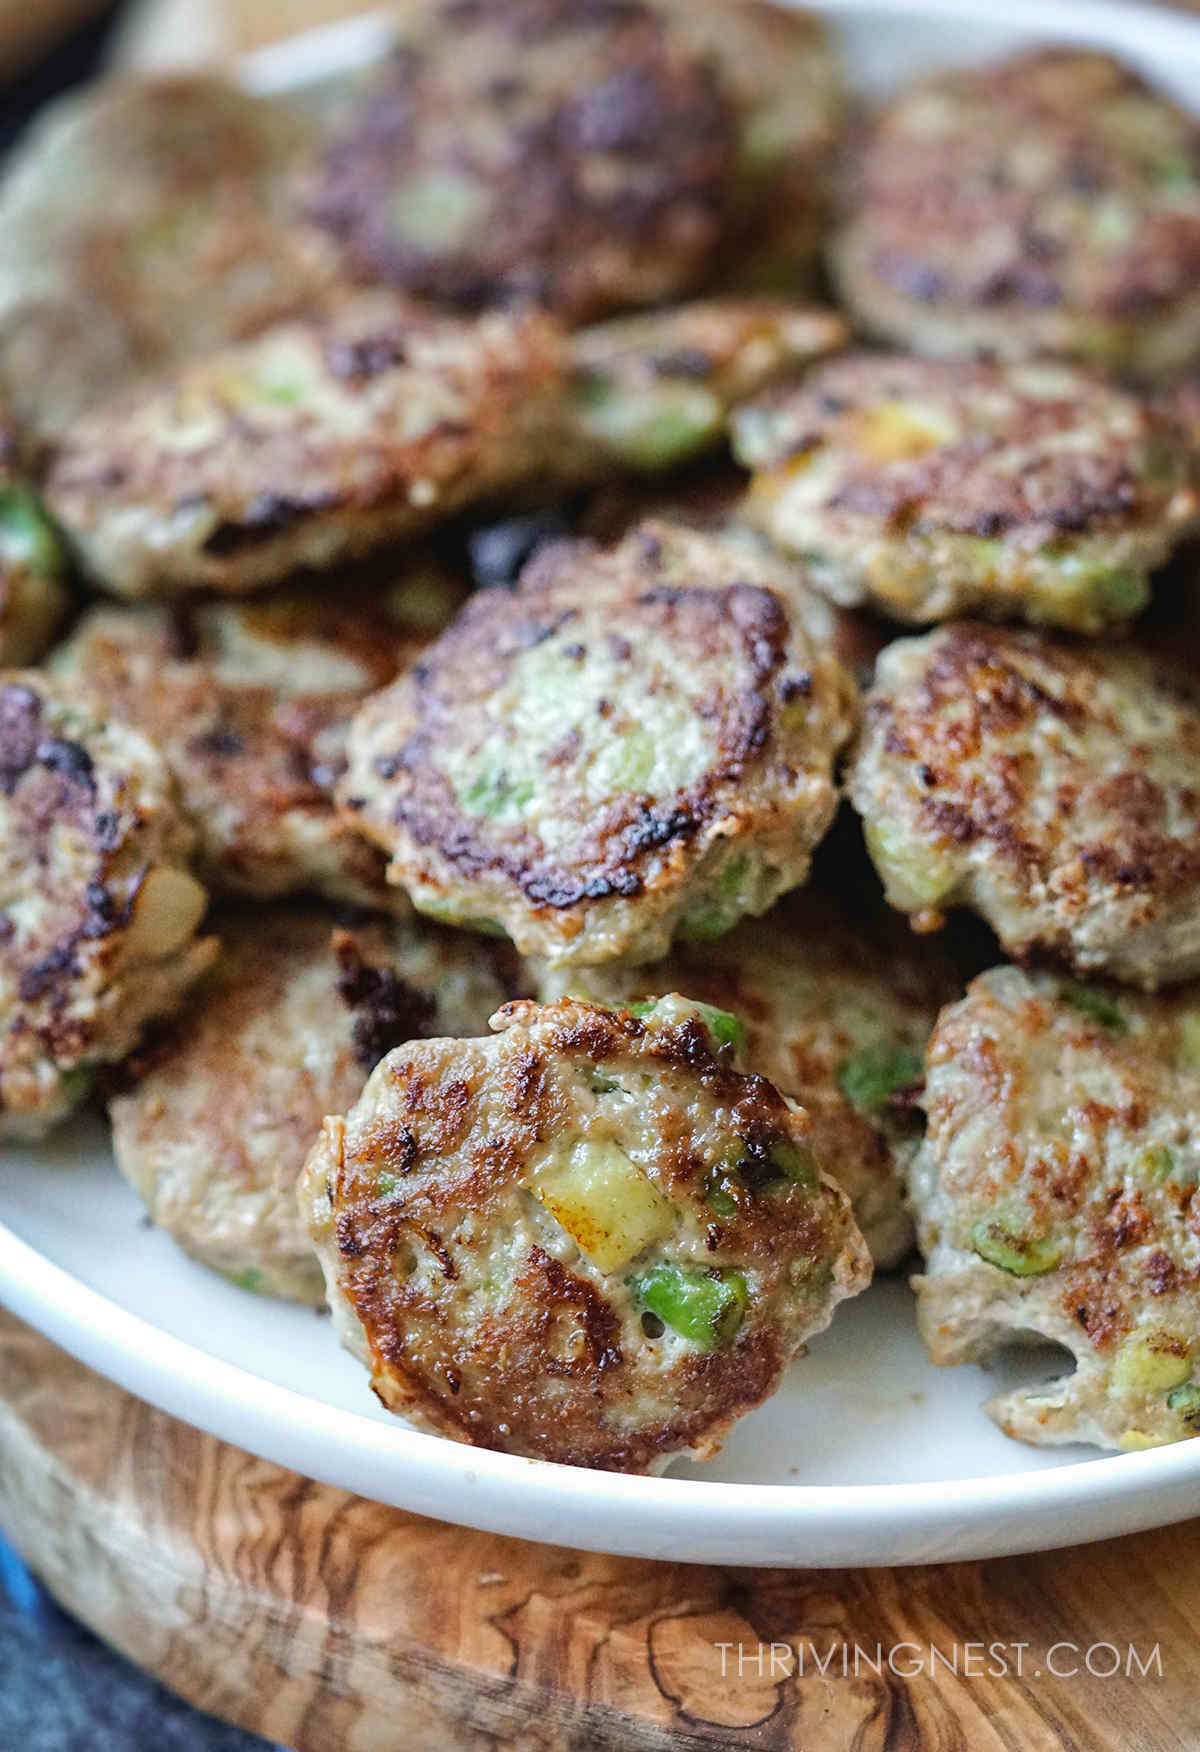 Avocado and turkey patties for babies 6-7 months + toddlers, baby led weaning, and older kids.